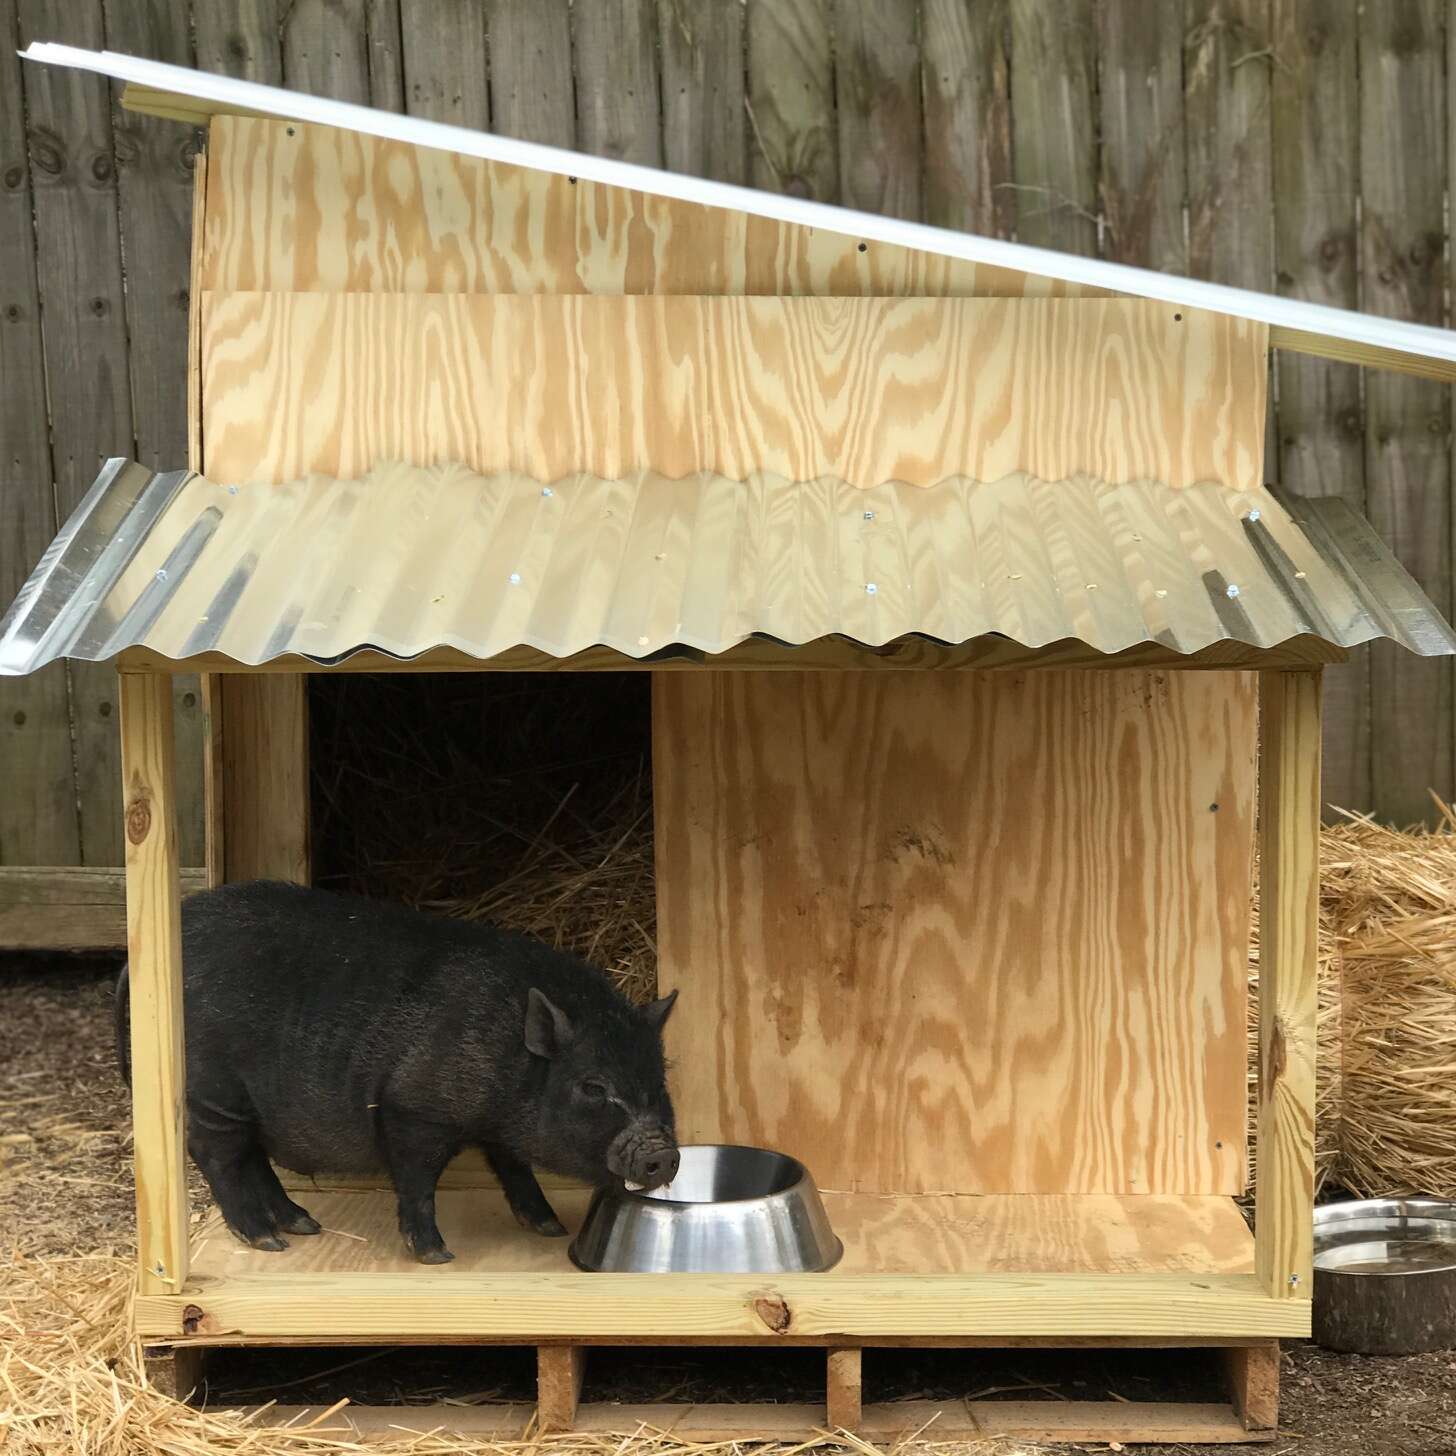 rescue pigs abandoned when they got too big